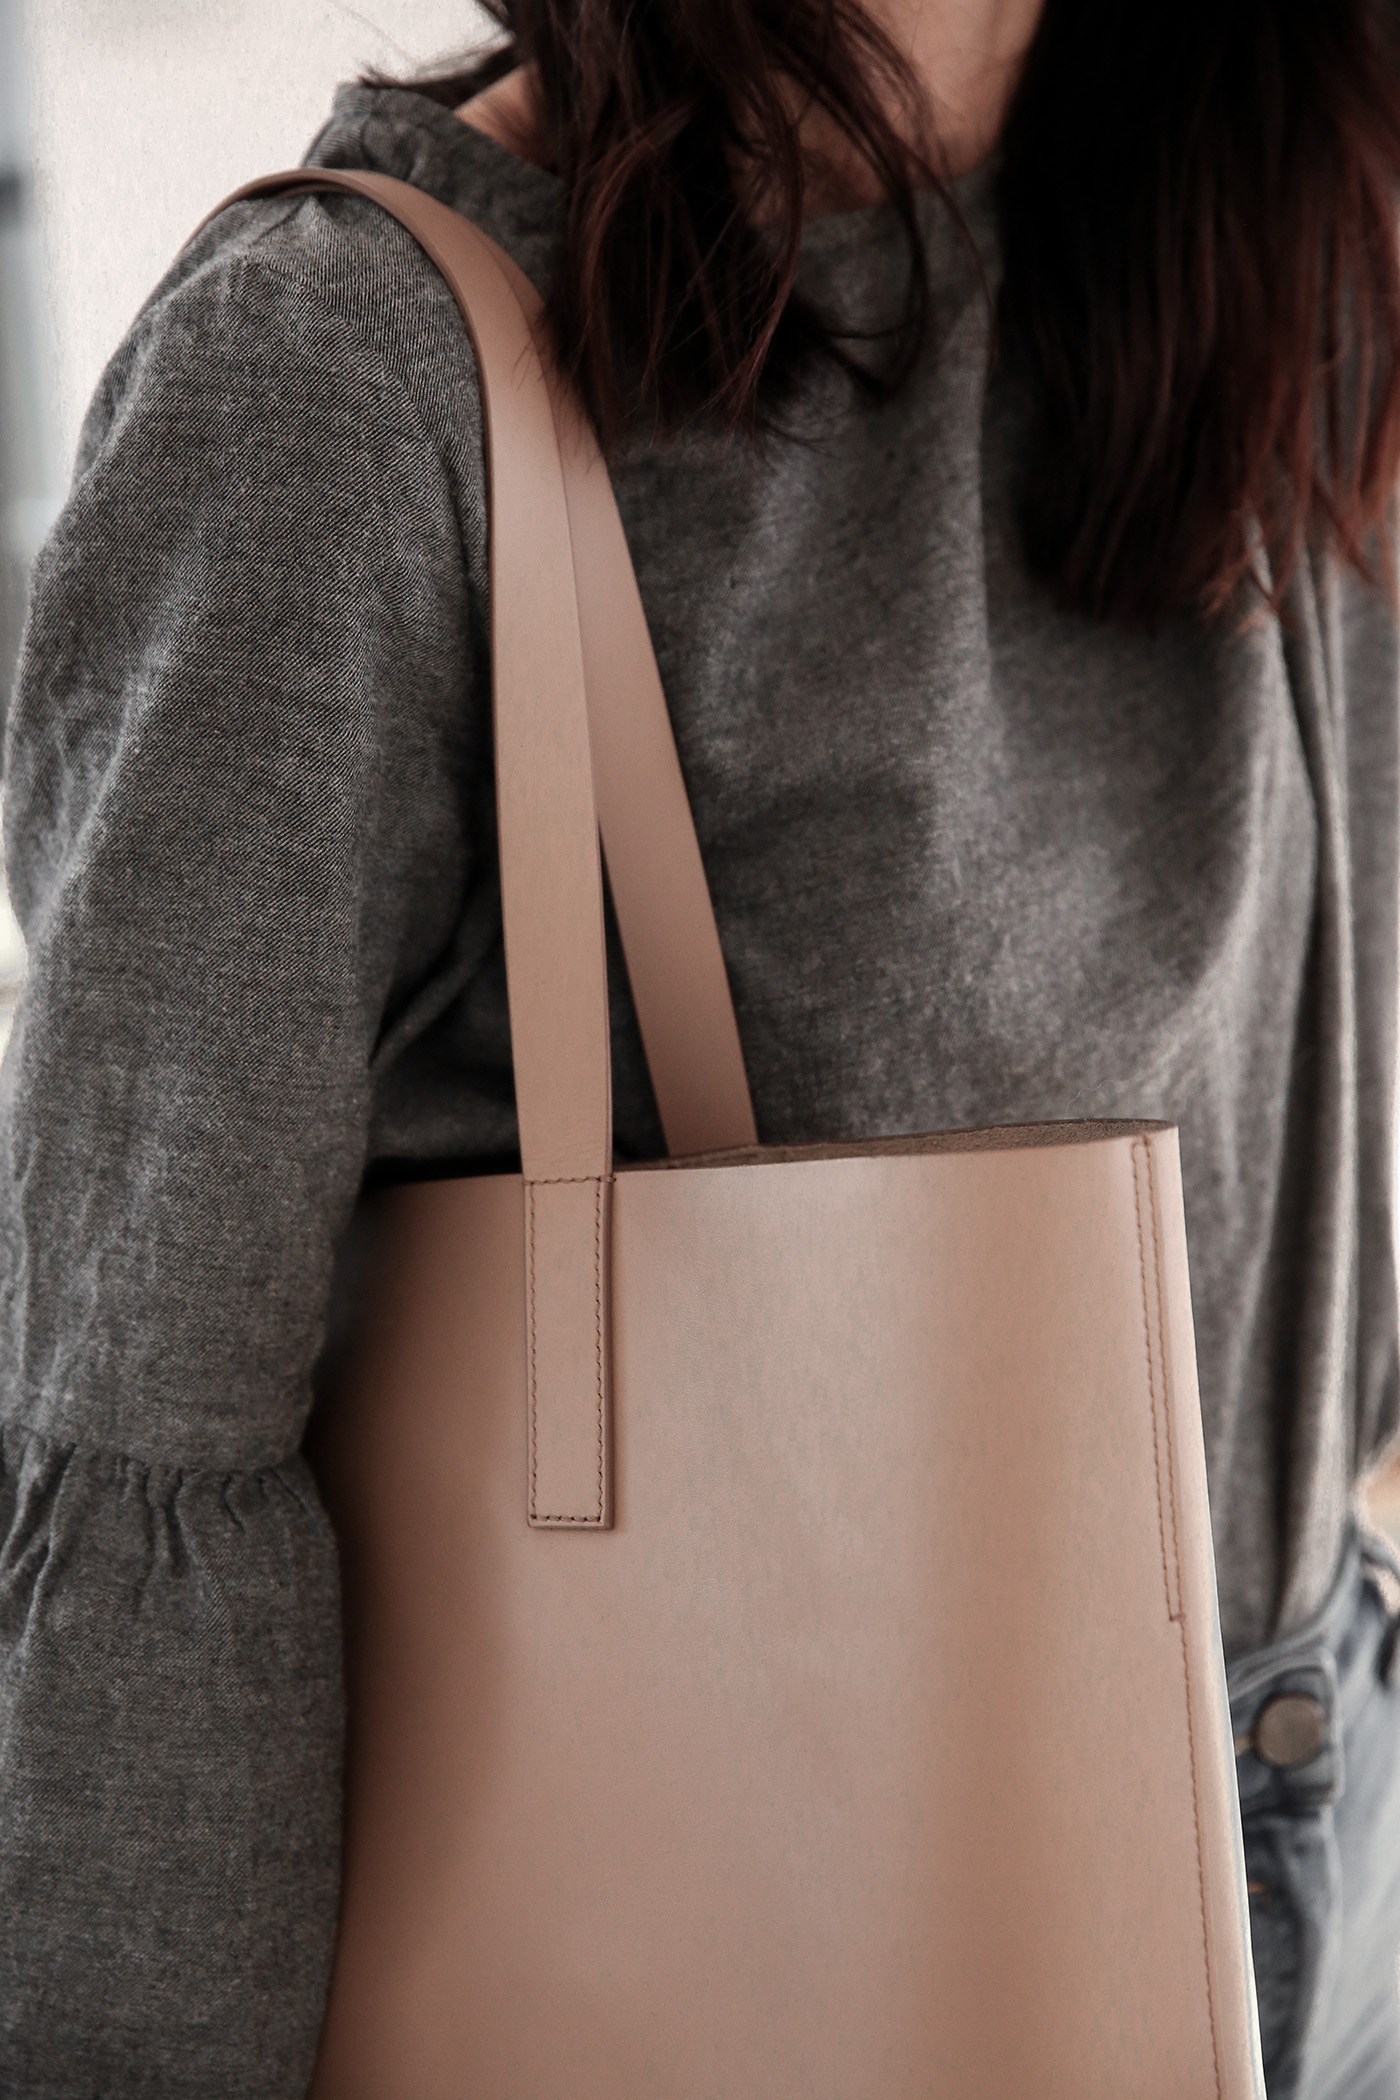 An Honest Review of the Everlane Day Market Tote